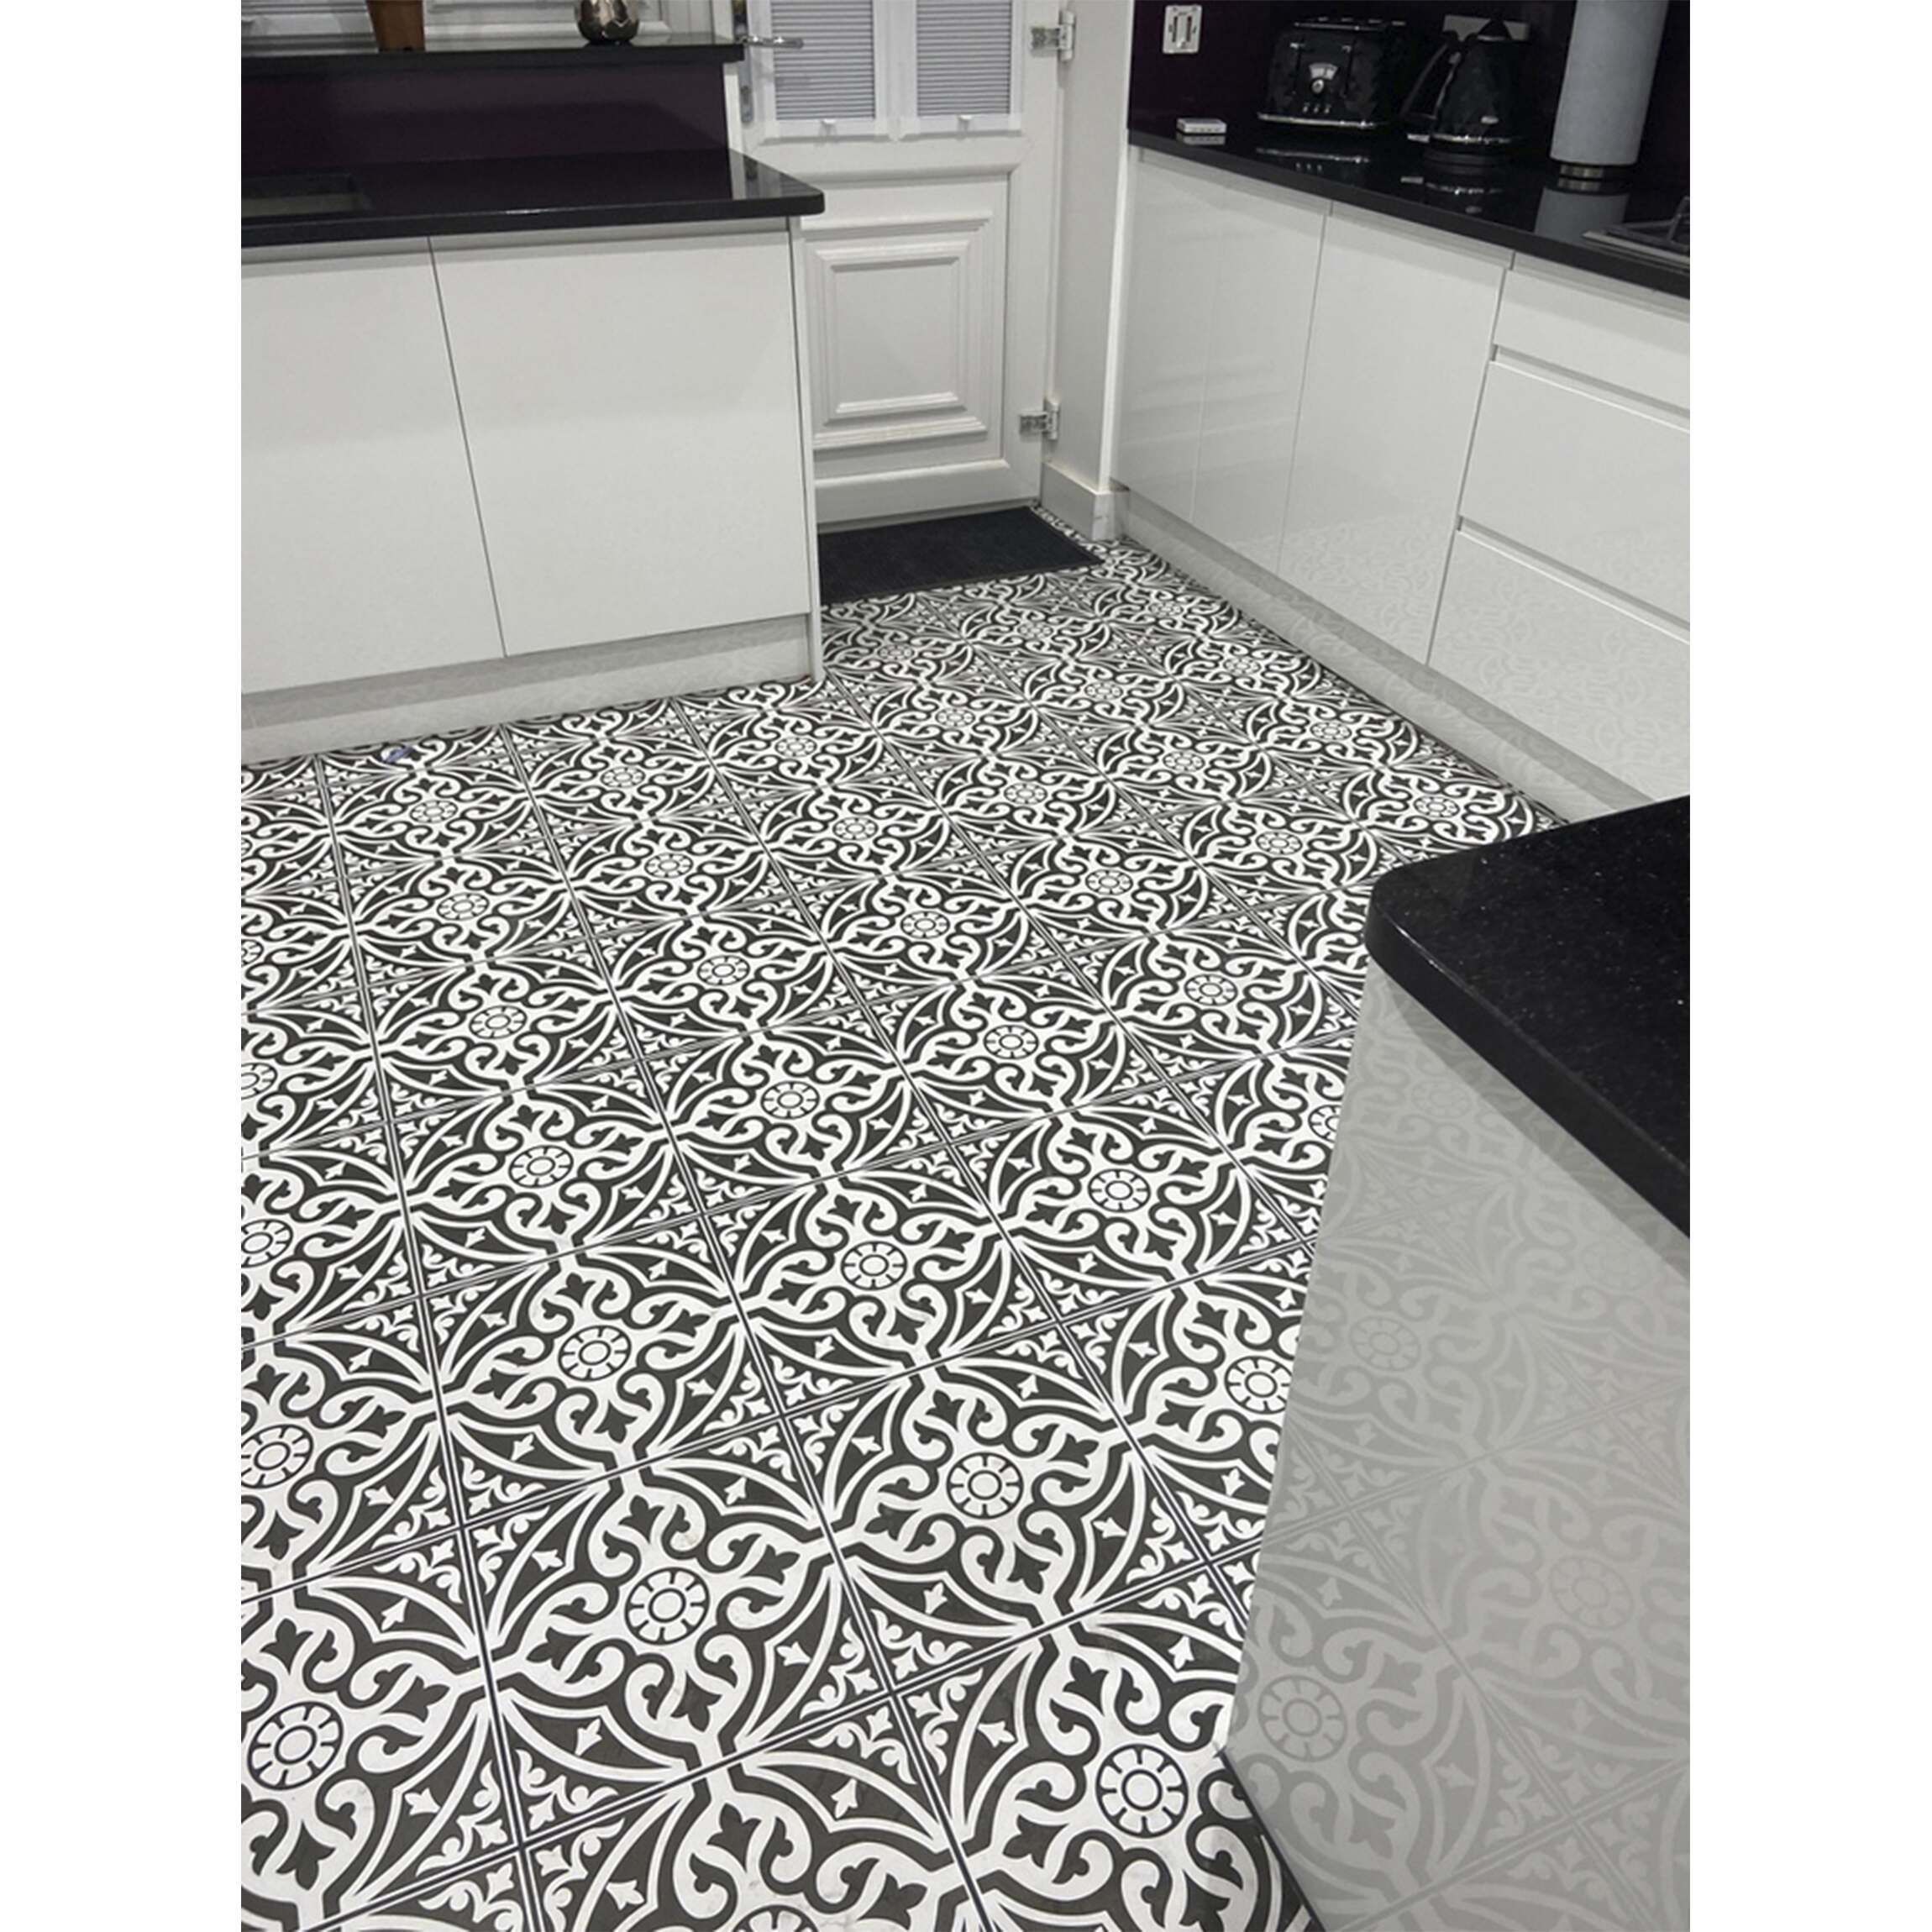 Floor Tile Tiles From Mountain, Grey And White Patterned Floor Tiles